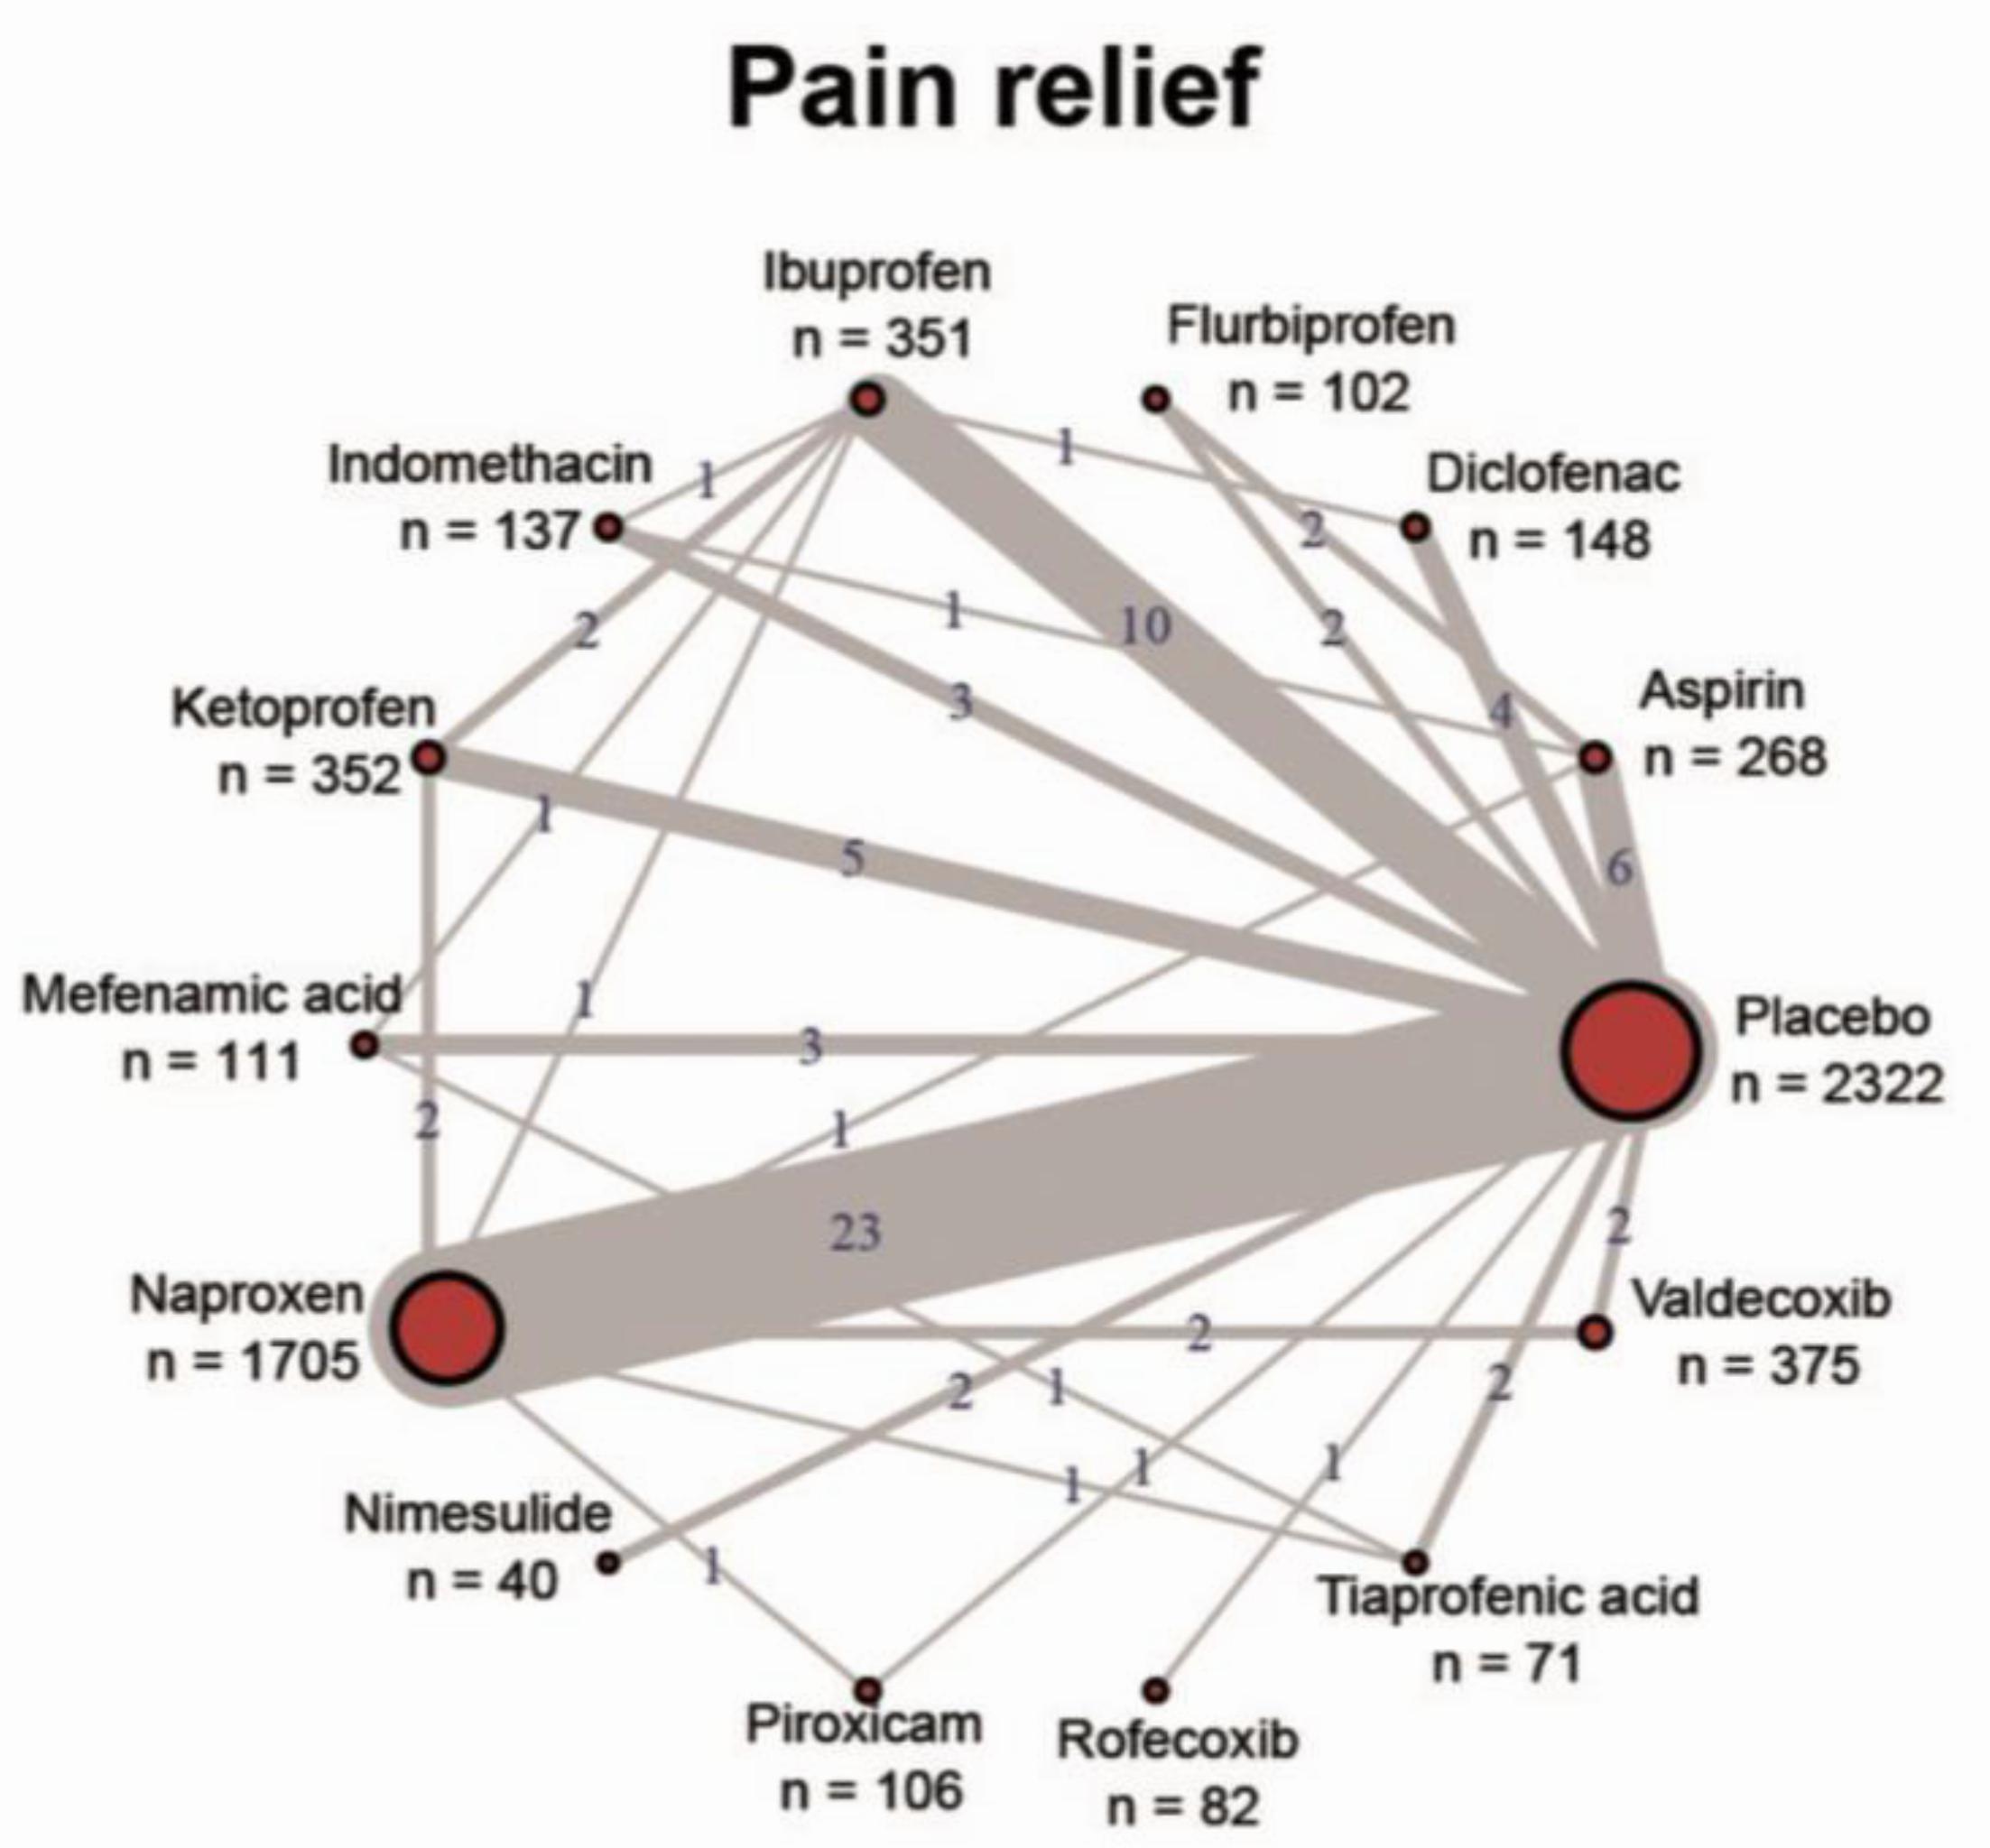 A network diagram showing the number of studies and their results for each drugs pain relief.